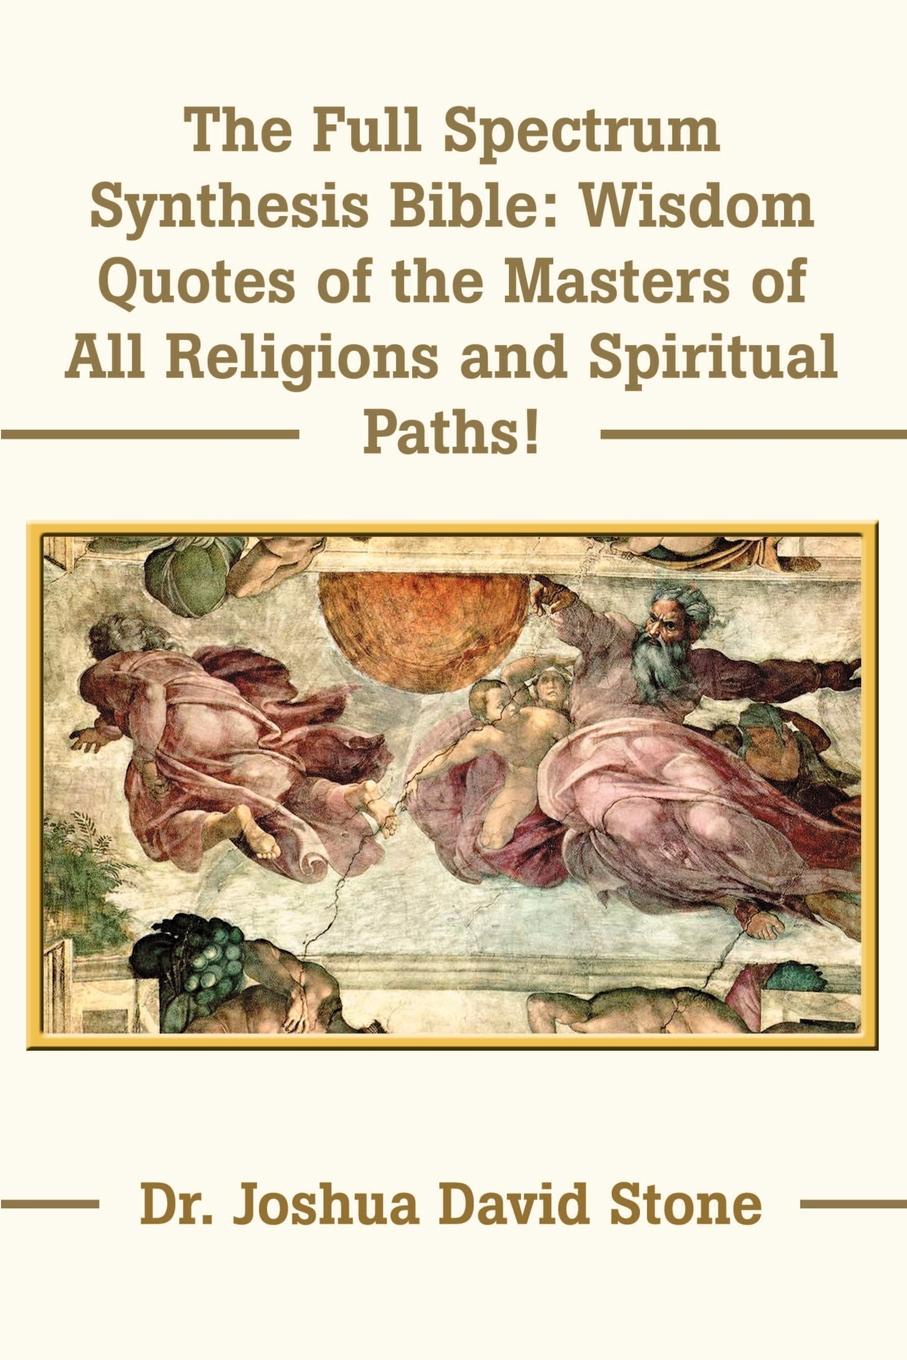 The Full Spectrum Synthesis Bible. Wisdom Quotes of the Masters of All Religions and Spiritual Paths